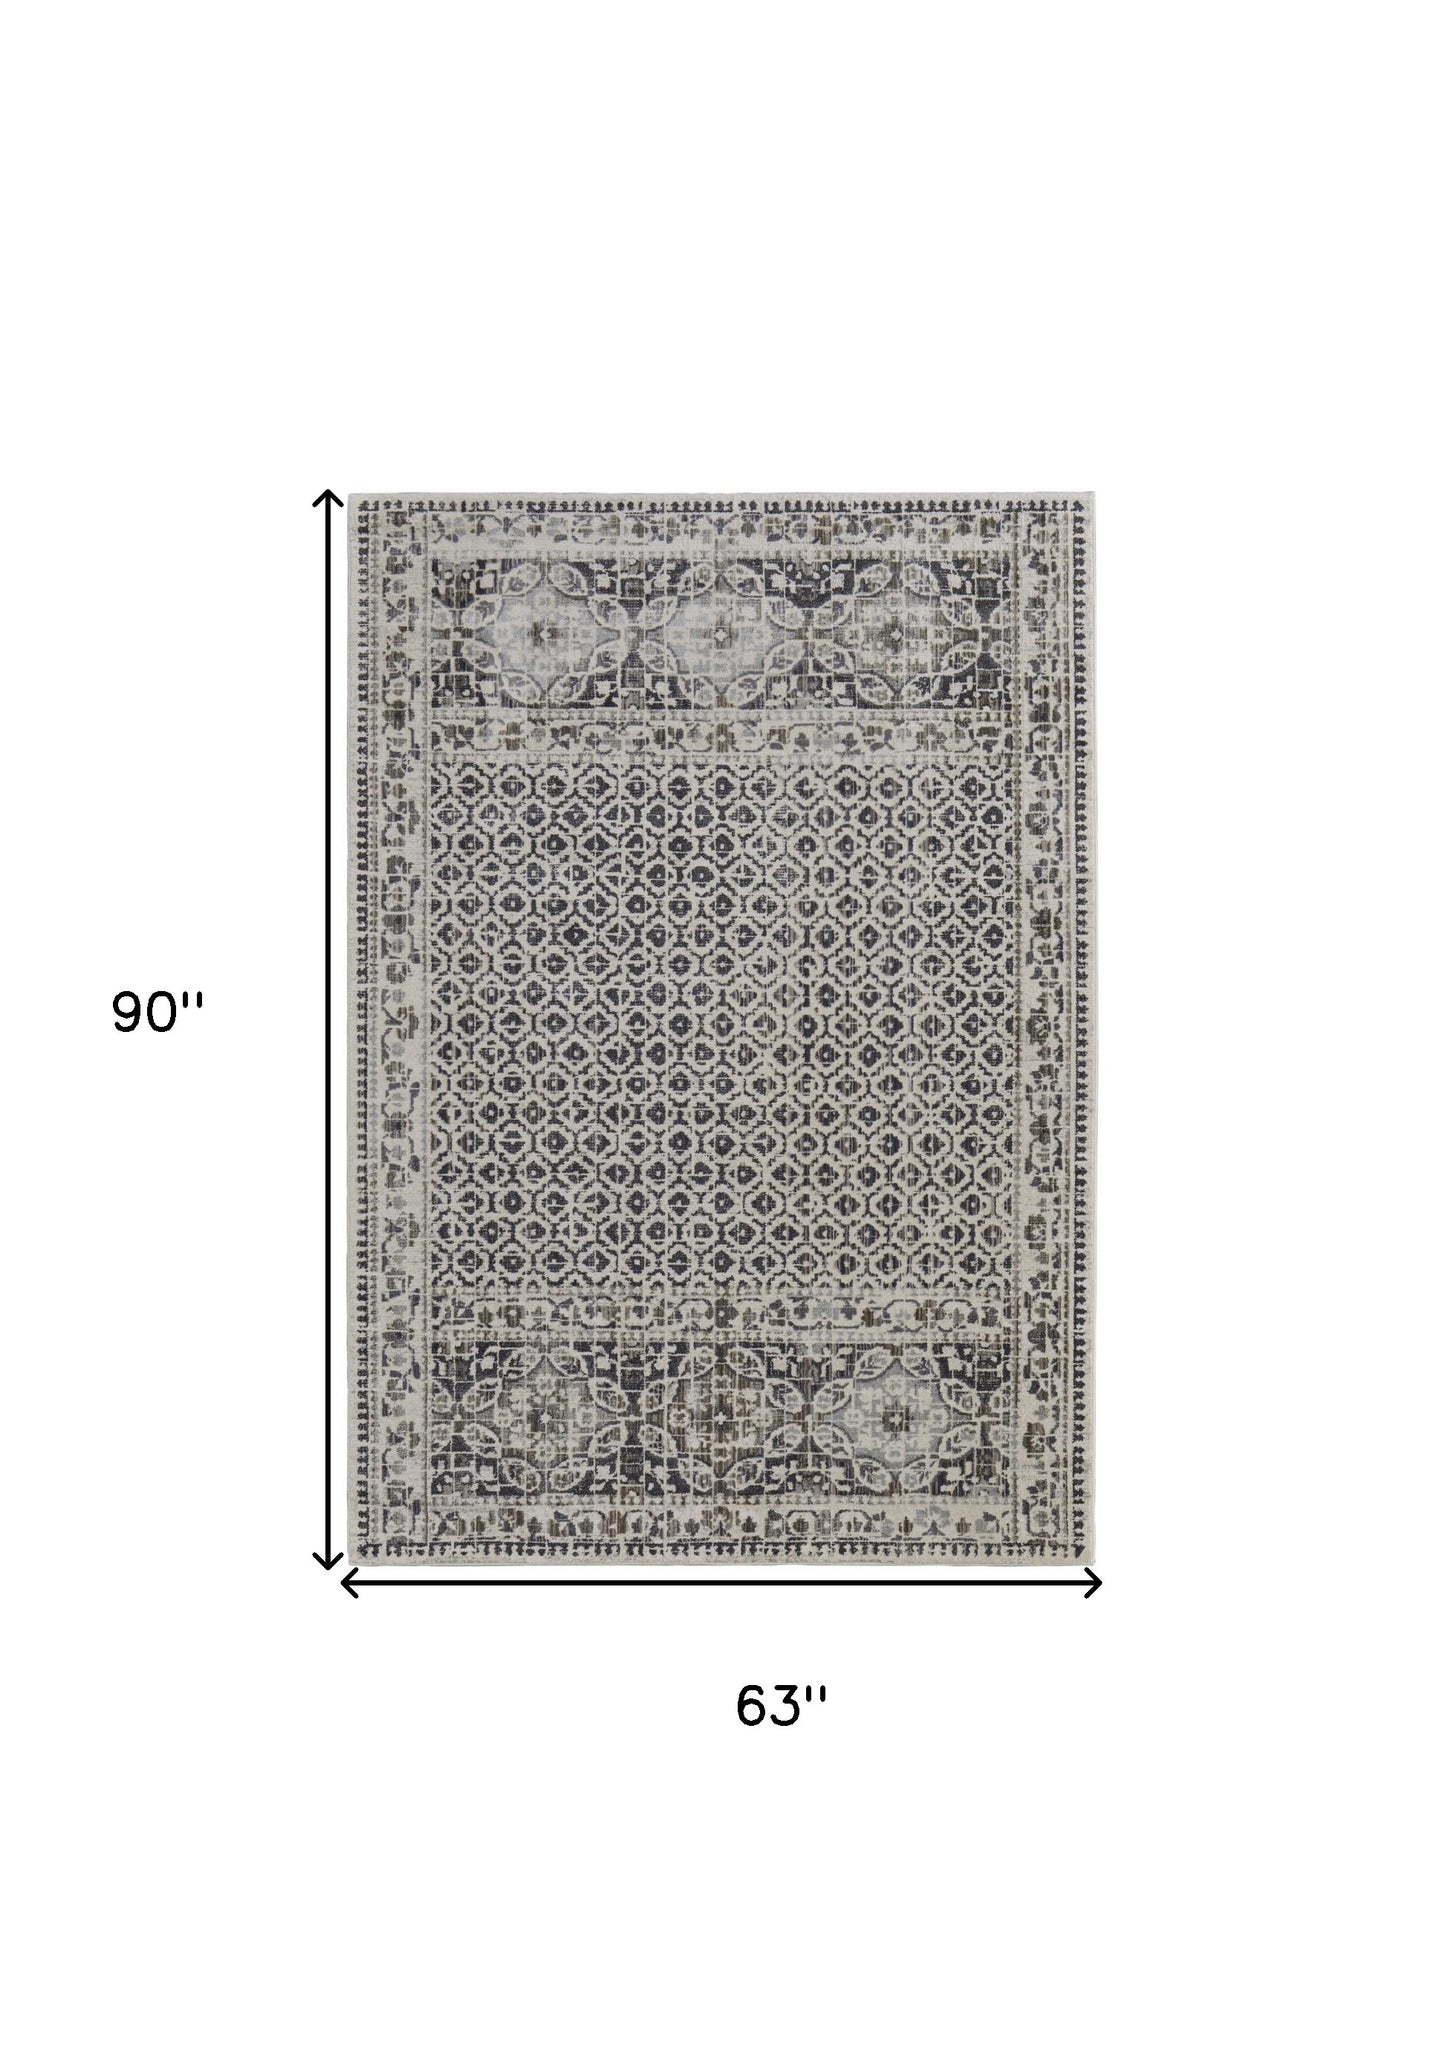 5' X 8' Ivory Taupe And Gray Abstract Stain Resistant Area Rug